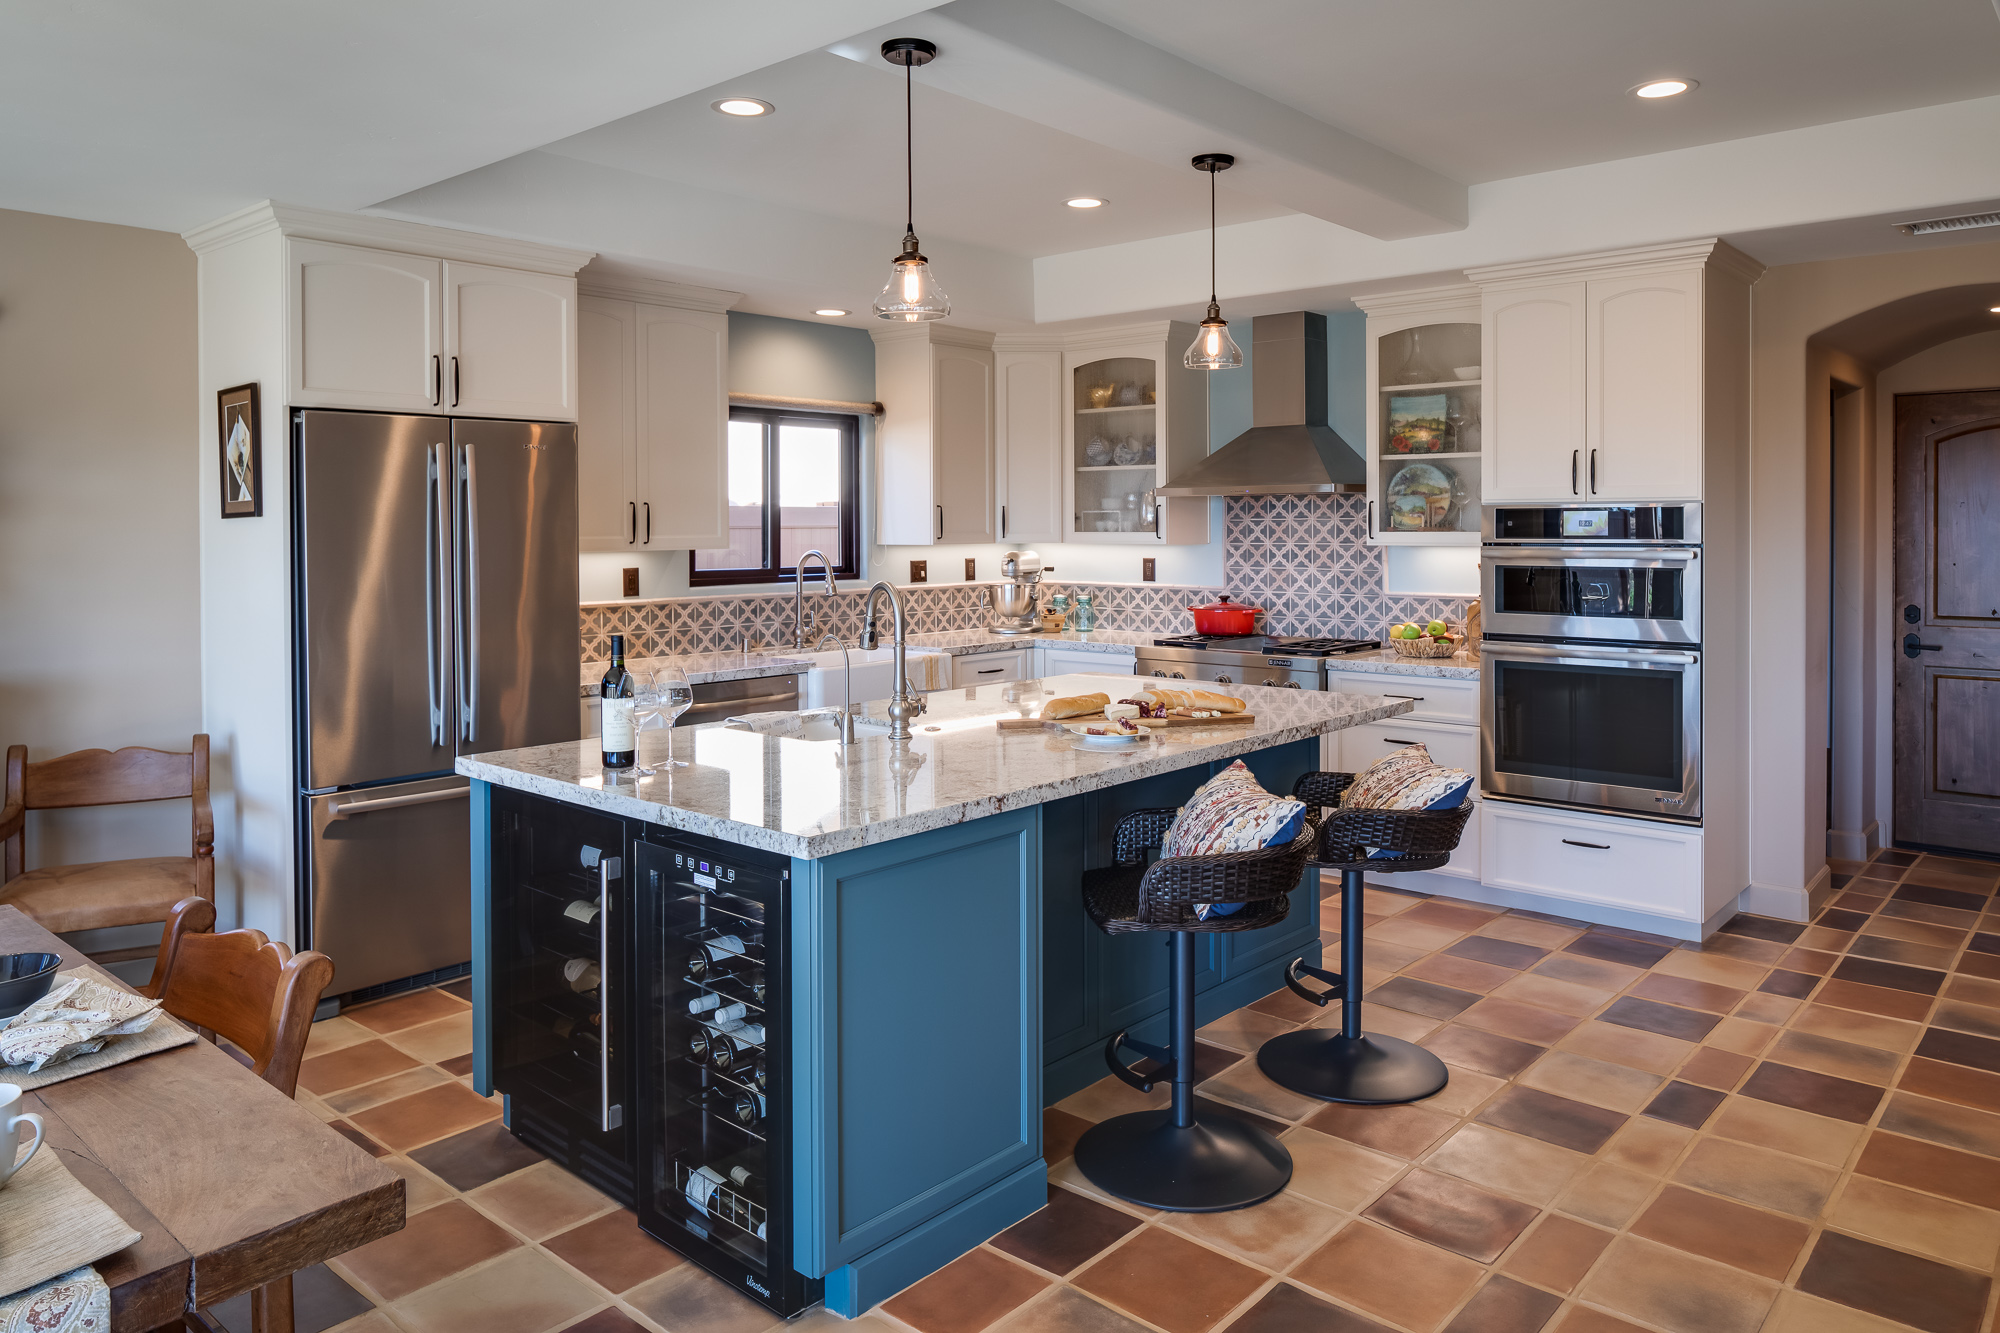 Tips on Planning a Successful Remodeling Project